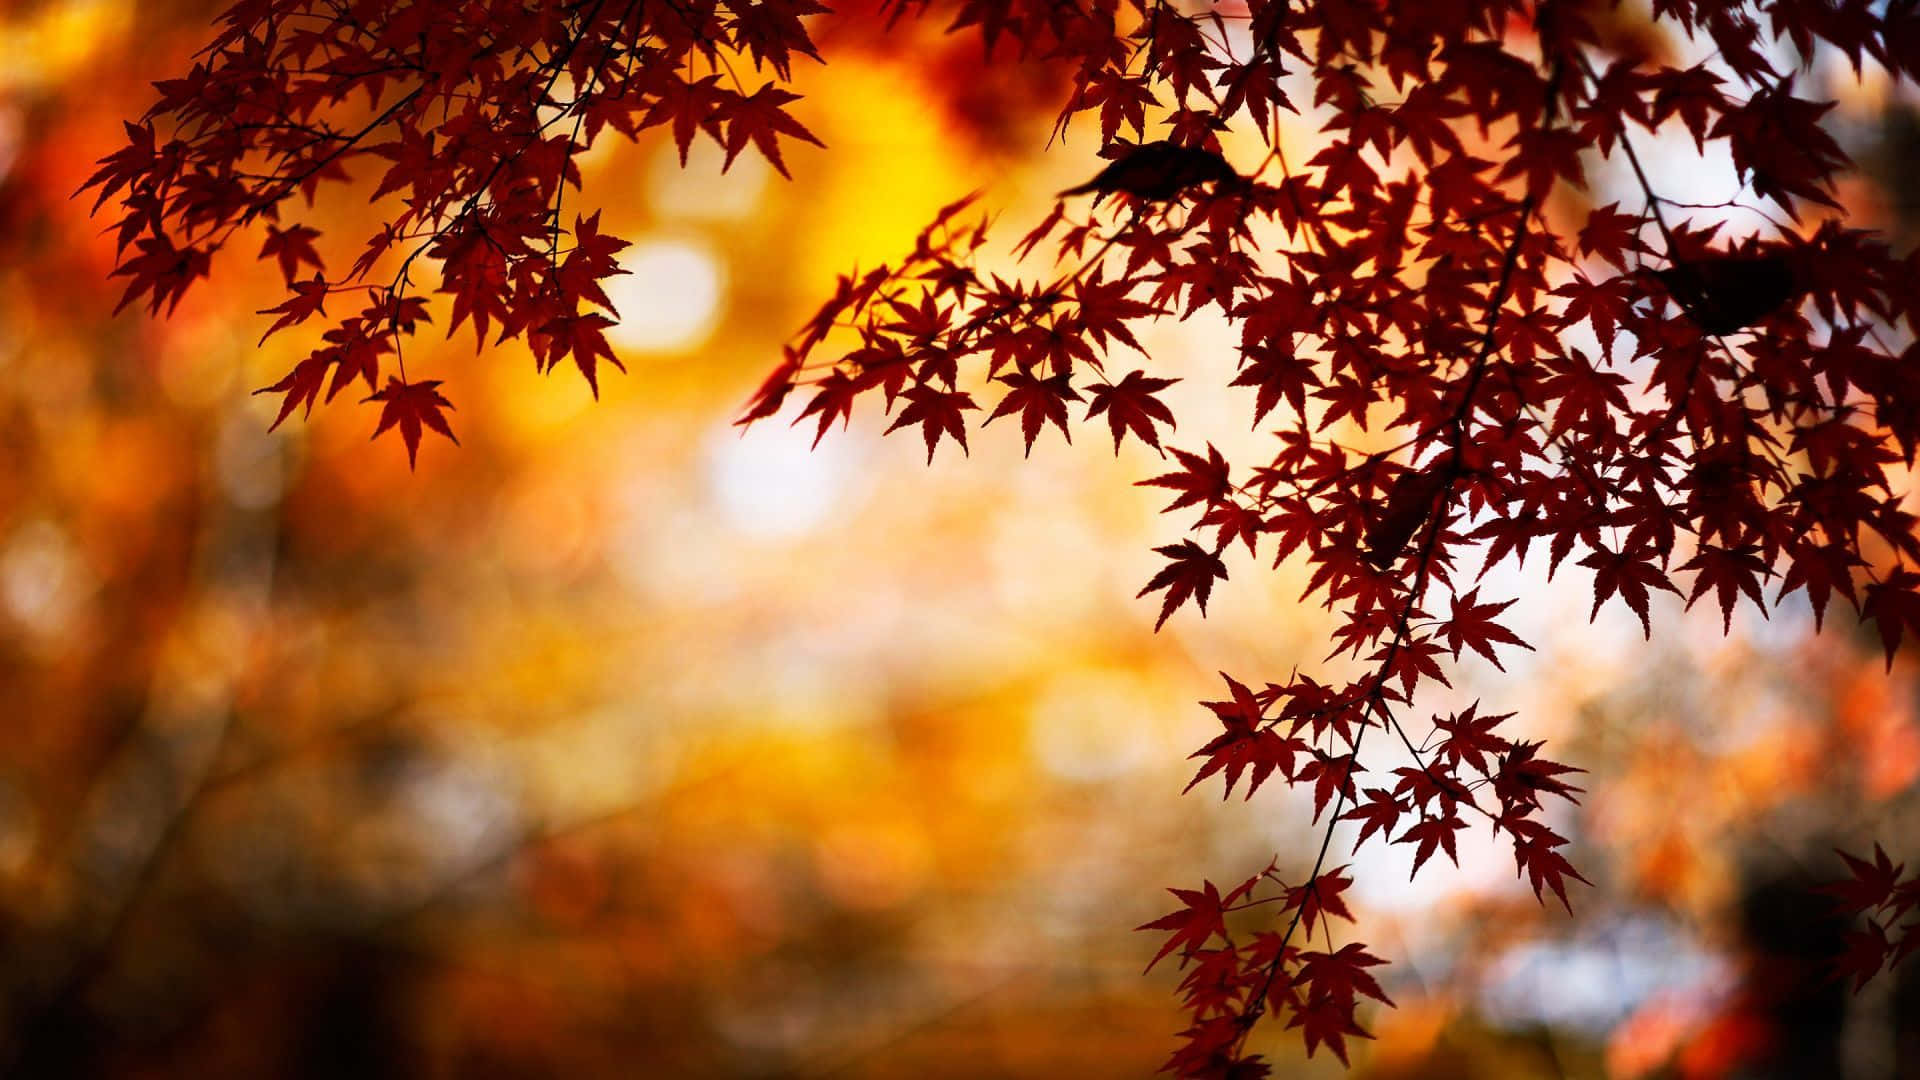 Welcome the Falling Leaves of Autumn Wallpaper